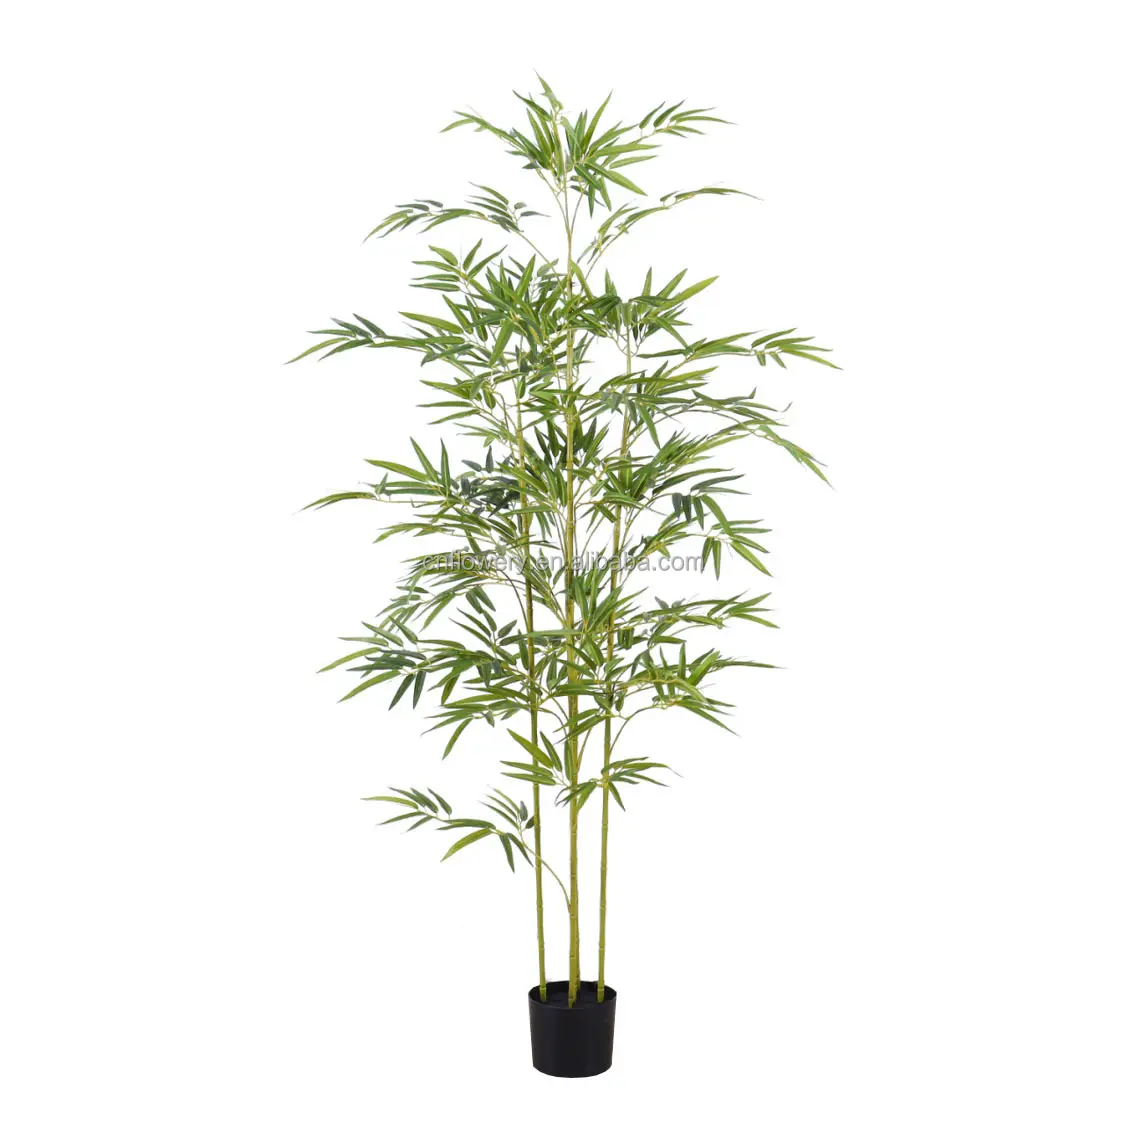 CNF Hot Sell Wholesale Home decoration Plastic Artificial Bamboo Tree plants Plastic Green Fake Bamboo for Decoration